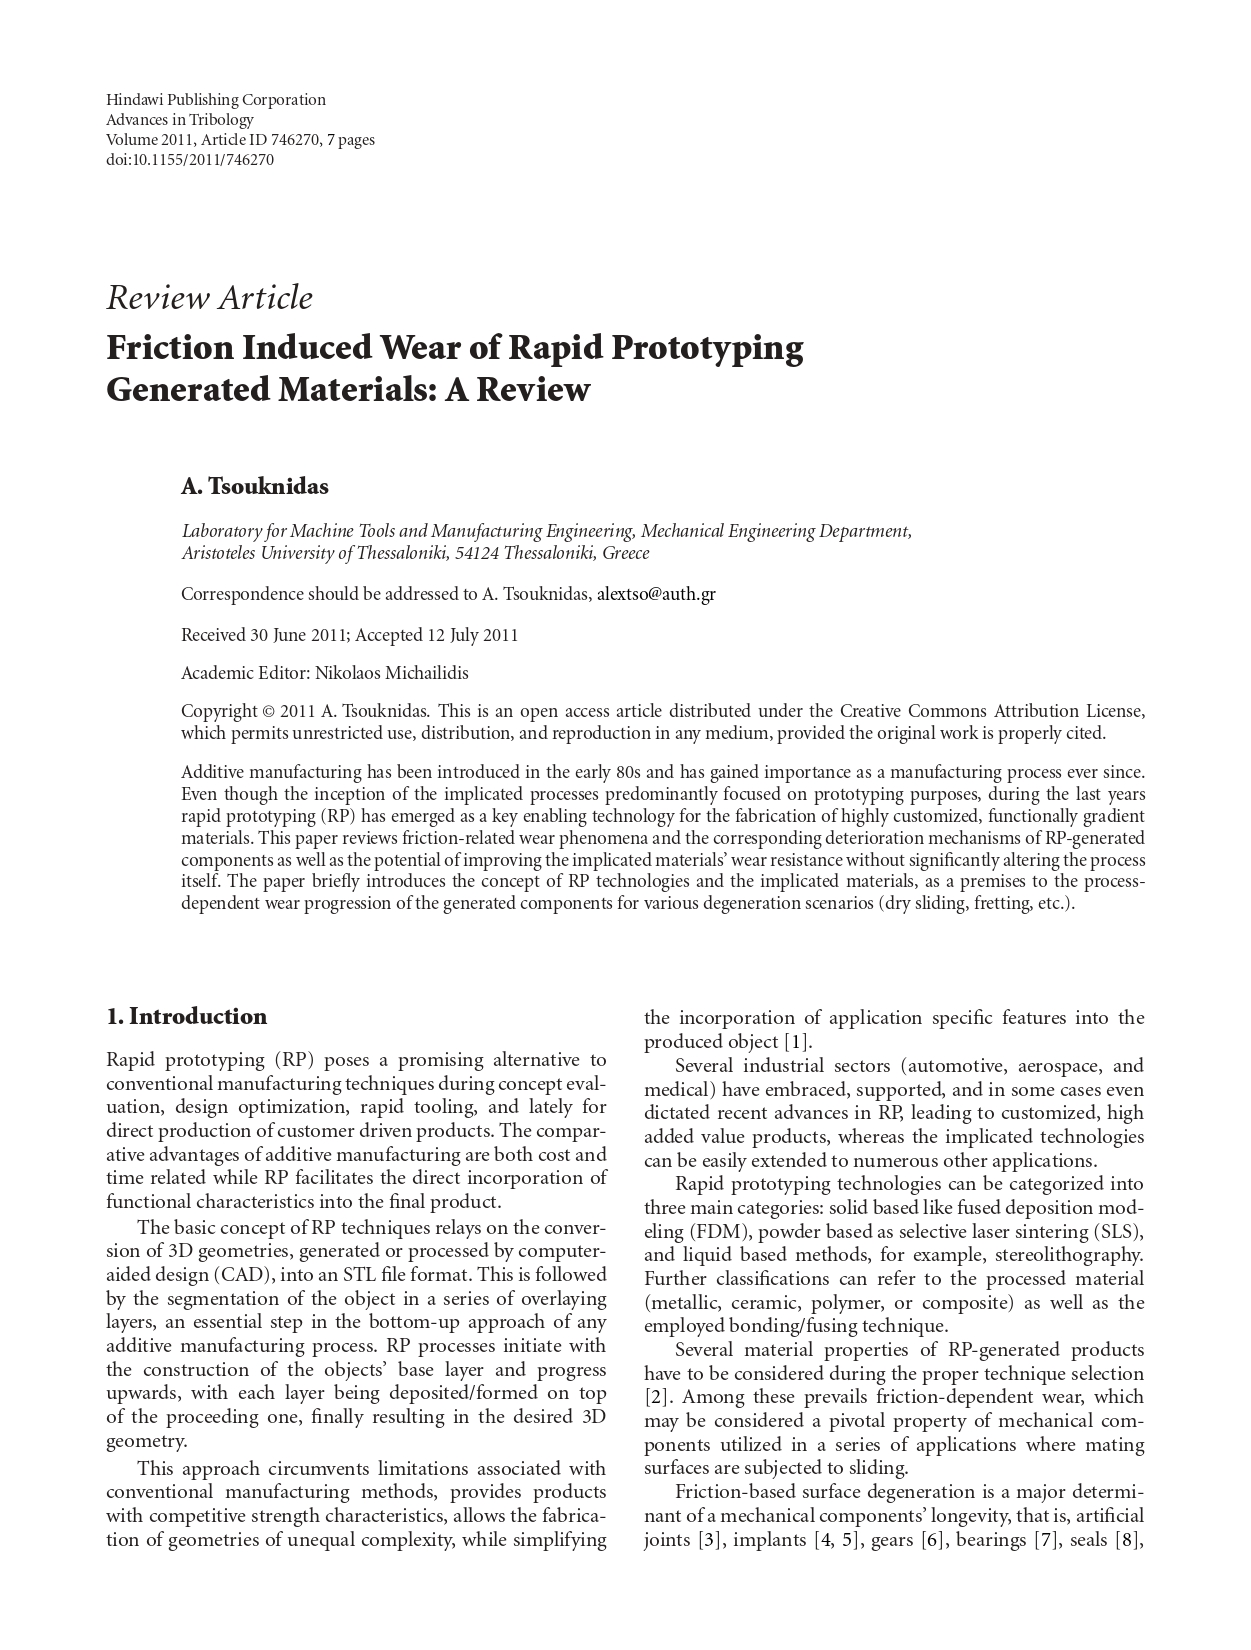 Friction induced wear of rapid prototyping generated materials A review_page-0001.jpg